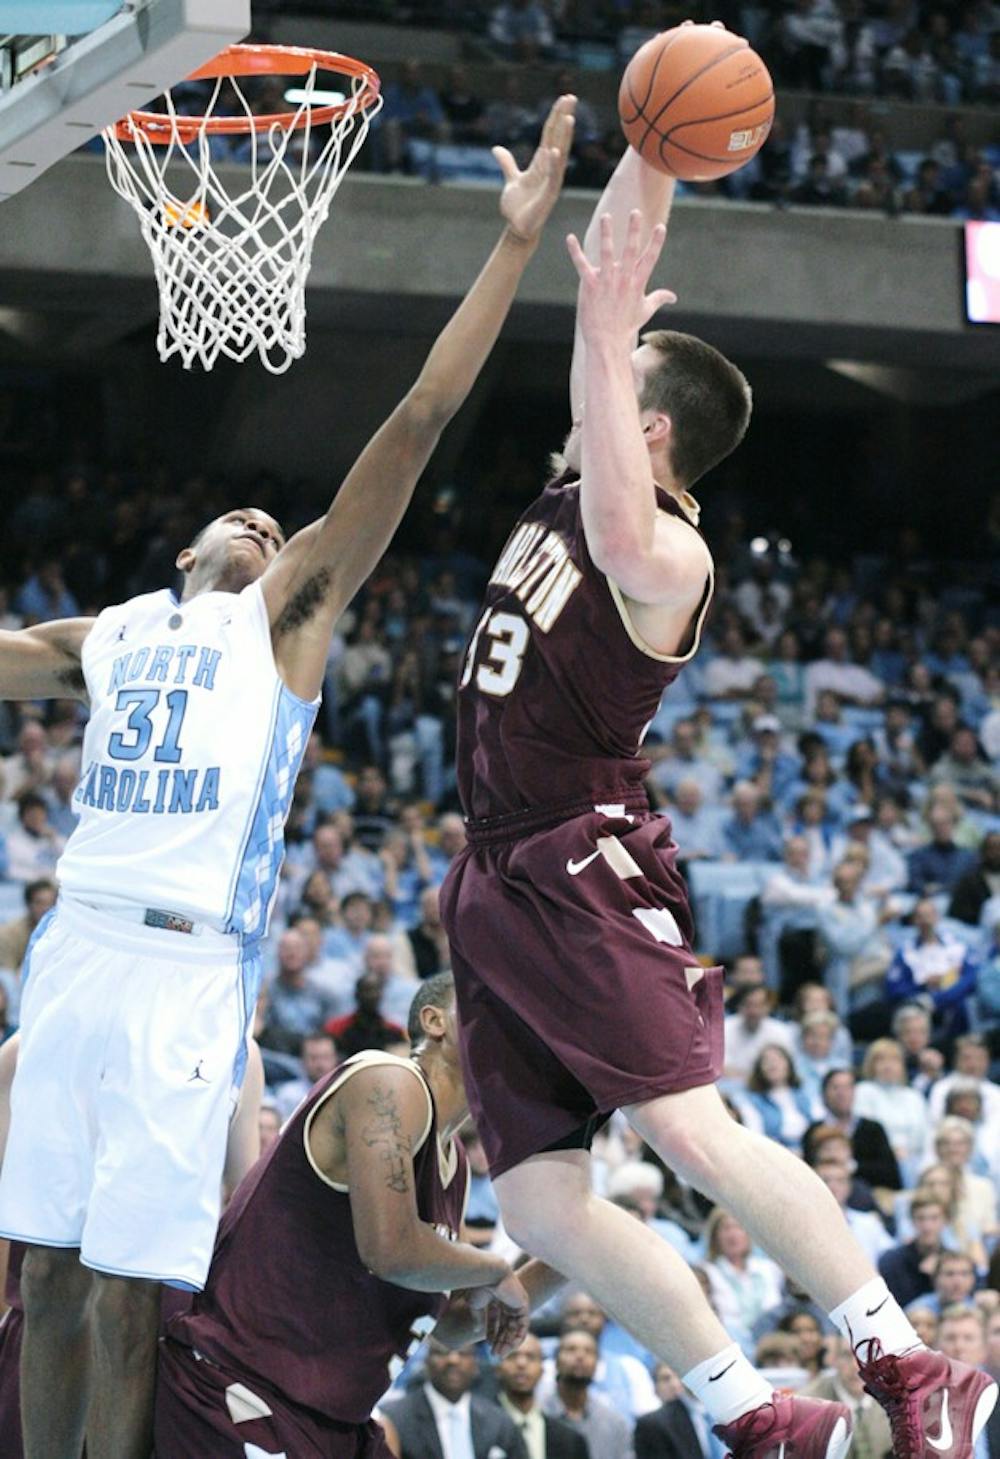 Sophomore forward John Henson goes up for a block against a Cougar. He was the first to score in a game-sealing 22-8 run for the Tar Heels.